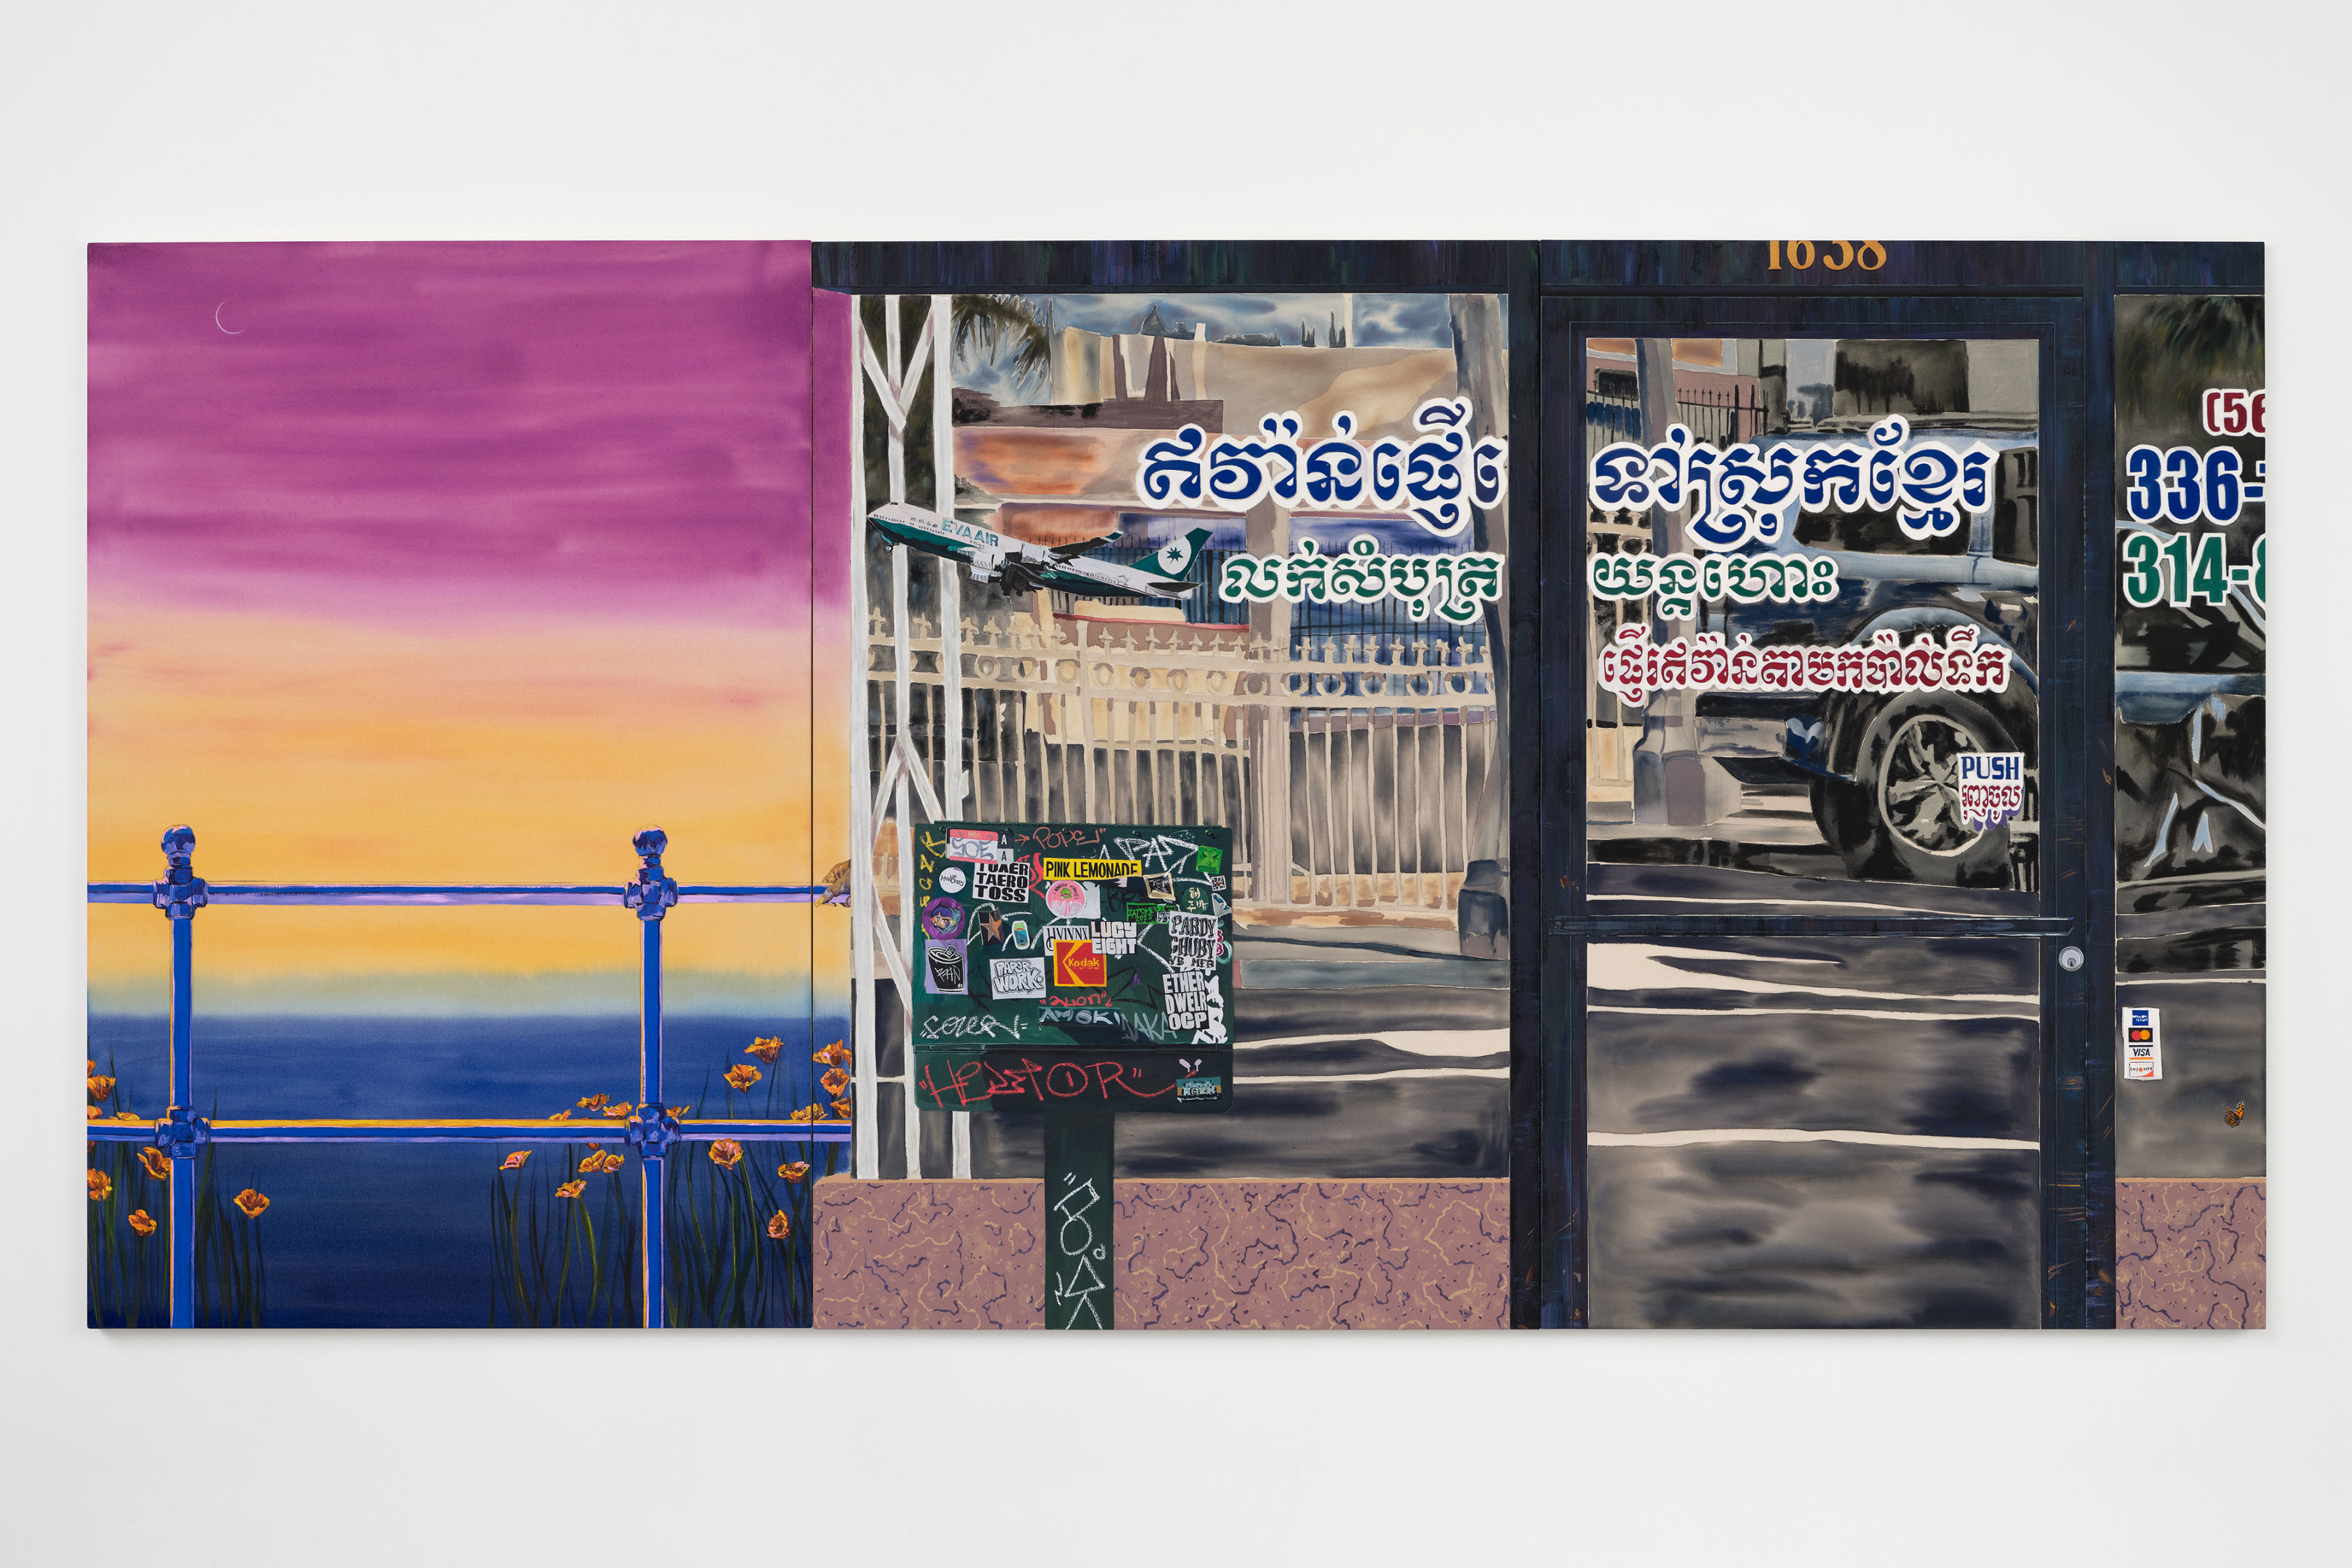 A three panel painting by Tidawhitney Lek depicting the entrance to a business with Thai script across the glass beside a metal railing in front of a sunset seascape with yellow flowers blooming.